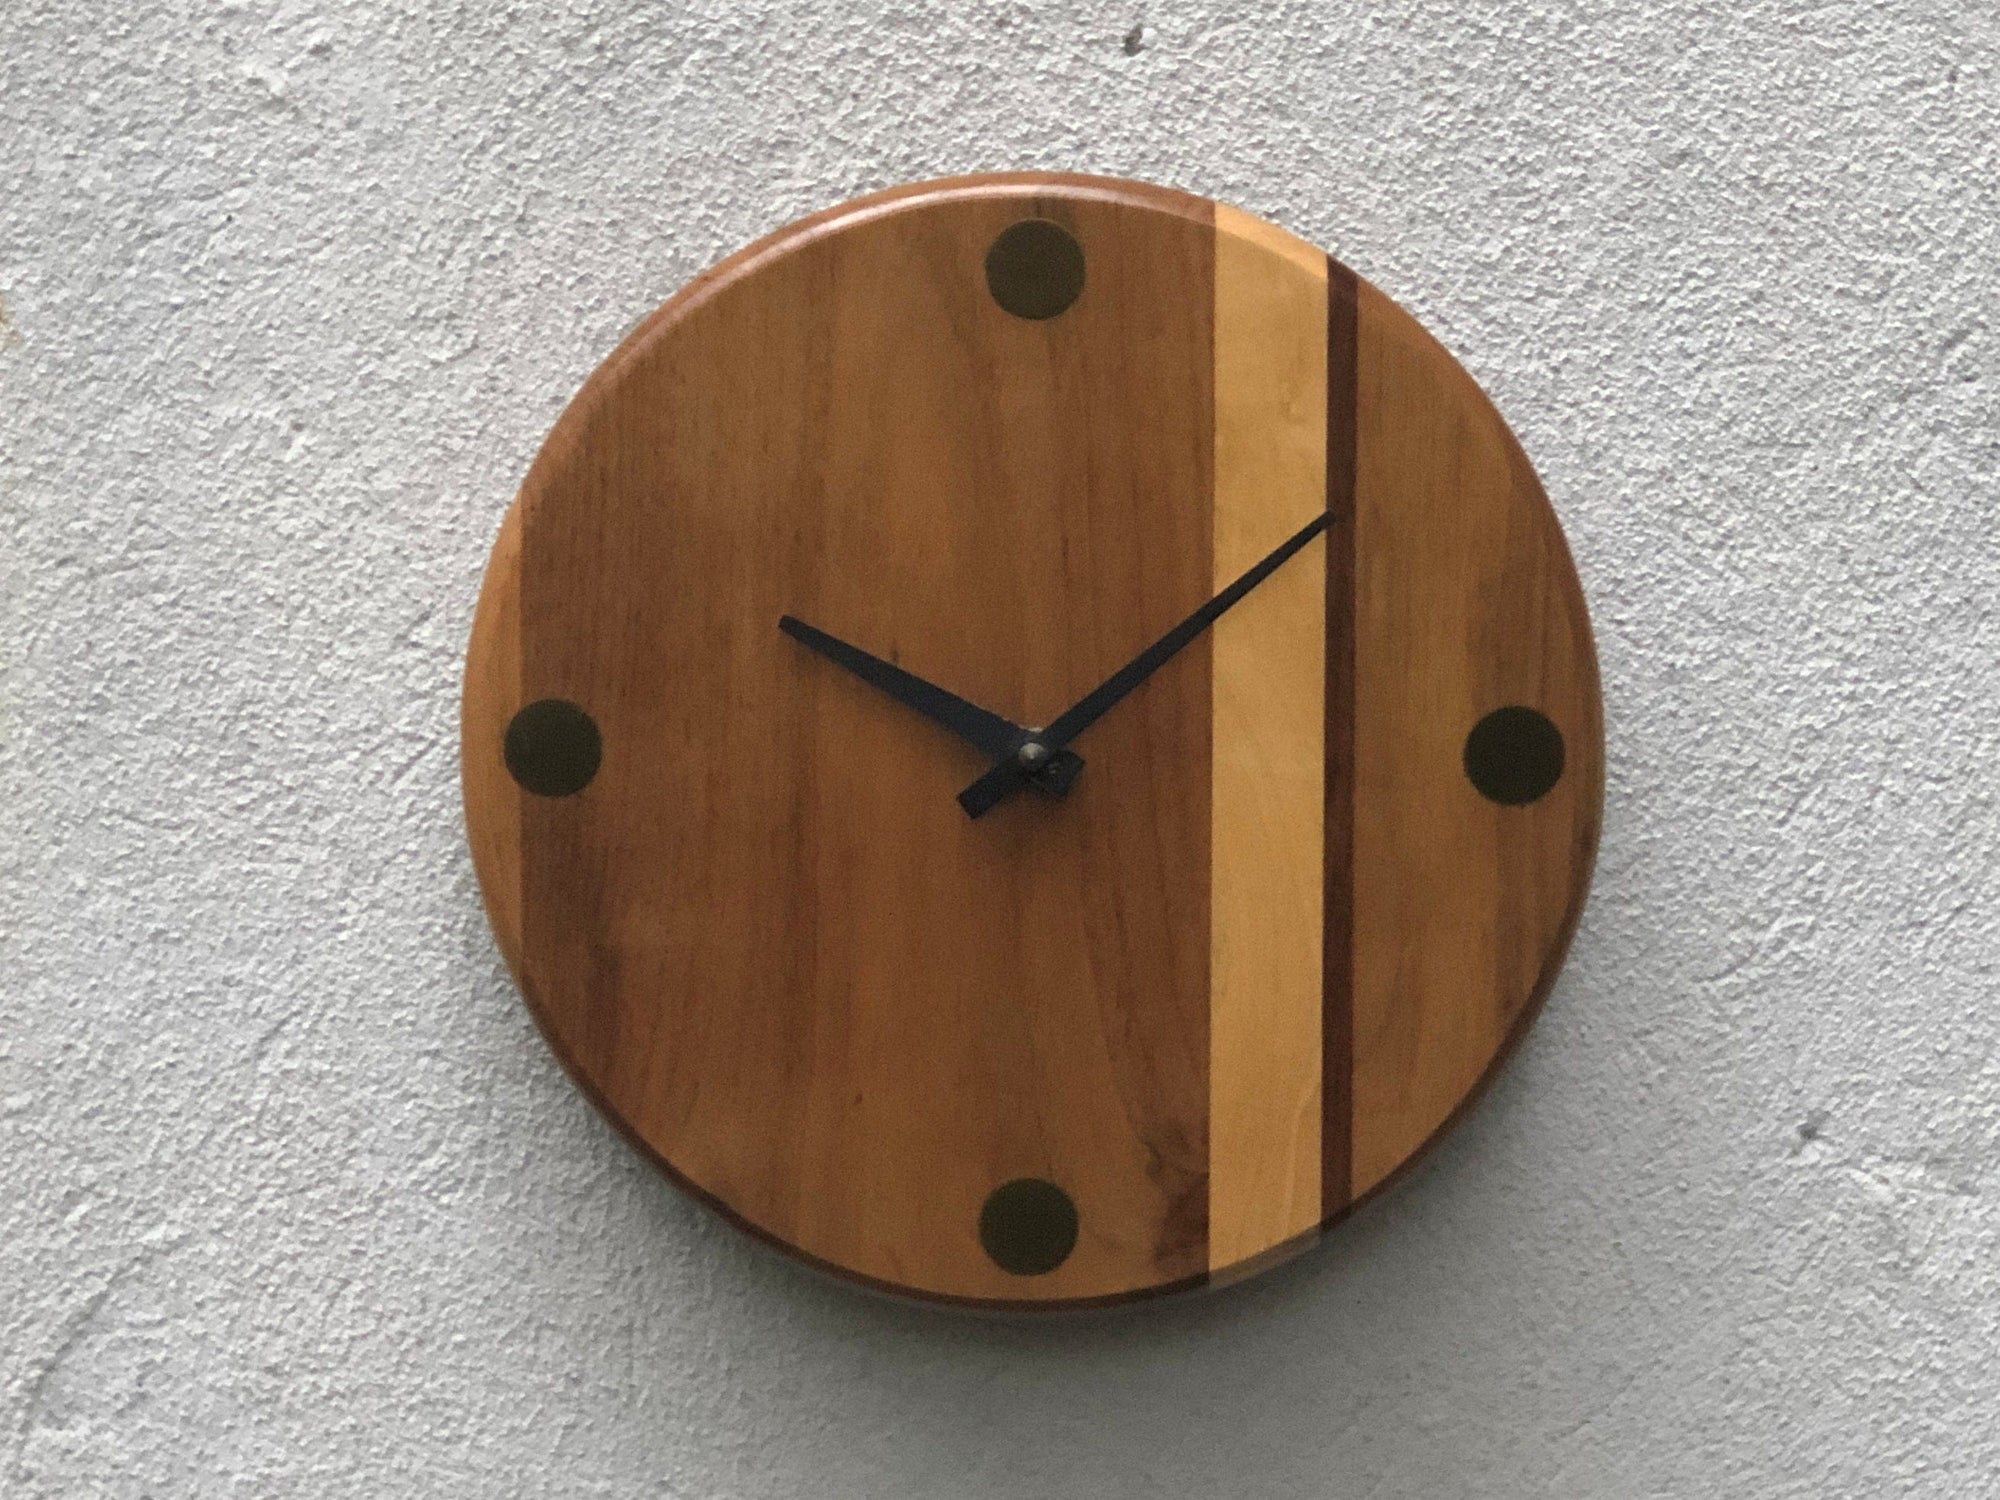 I Like Mike's Mid Century Modern Clock Modern Handcrafted Round Solid Wood Wall Clock, Inlayed Brass Markers, Quiet Quartz Movement